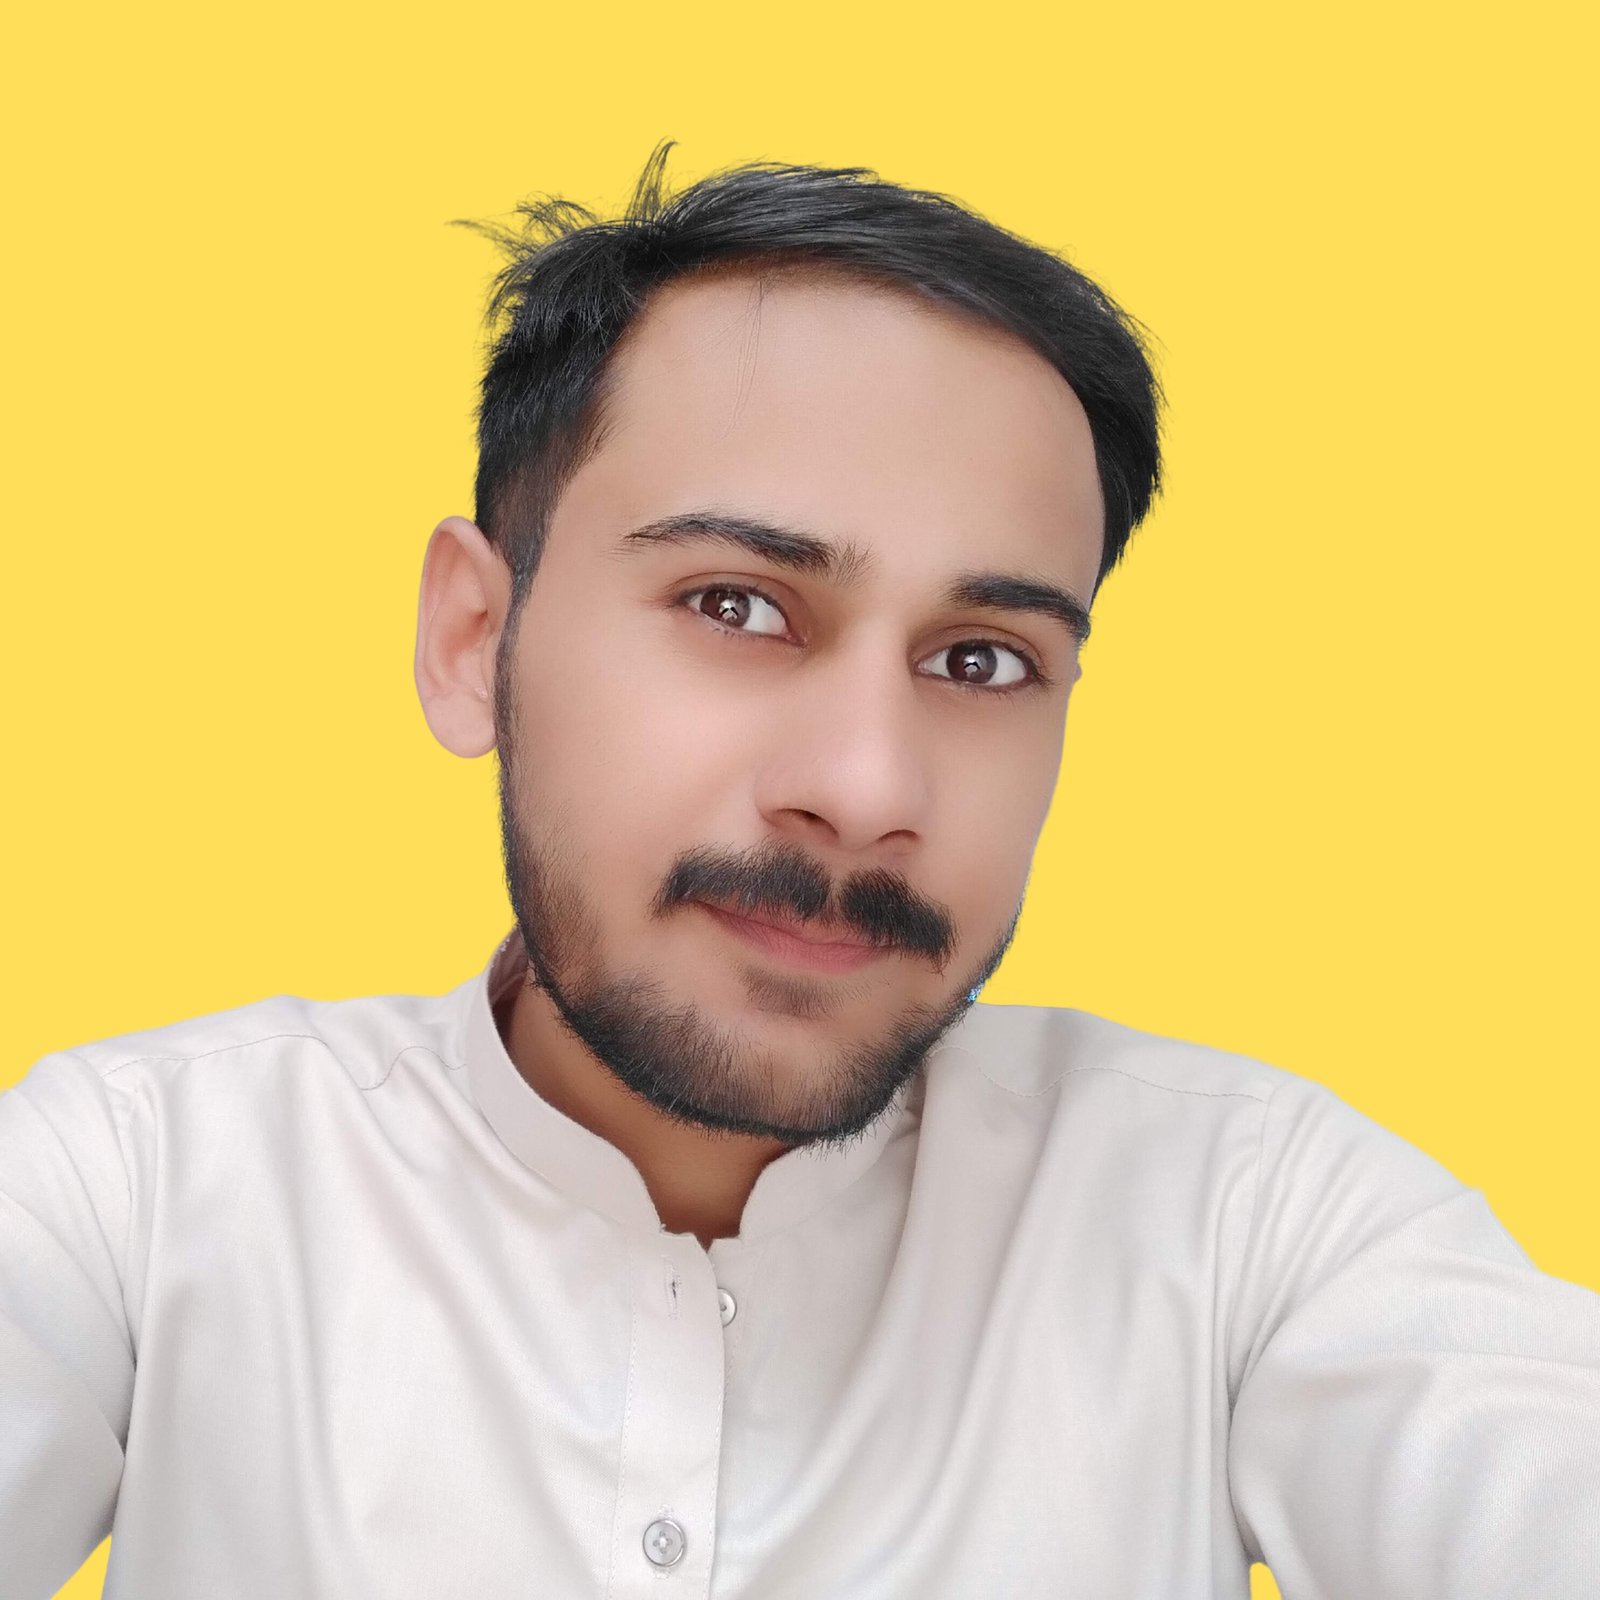 Profile picture of Babar Ali, the founder of Diginta Marketing